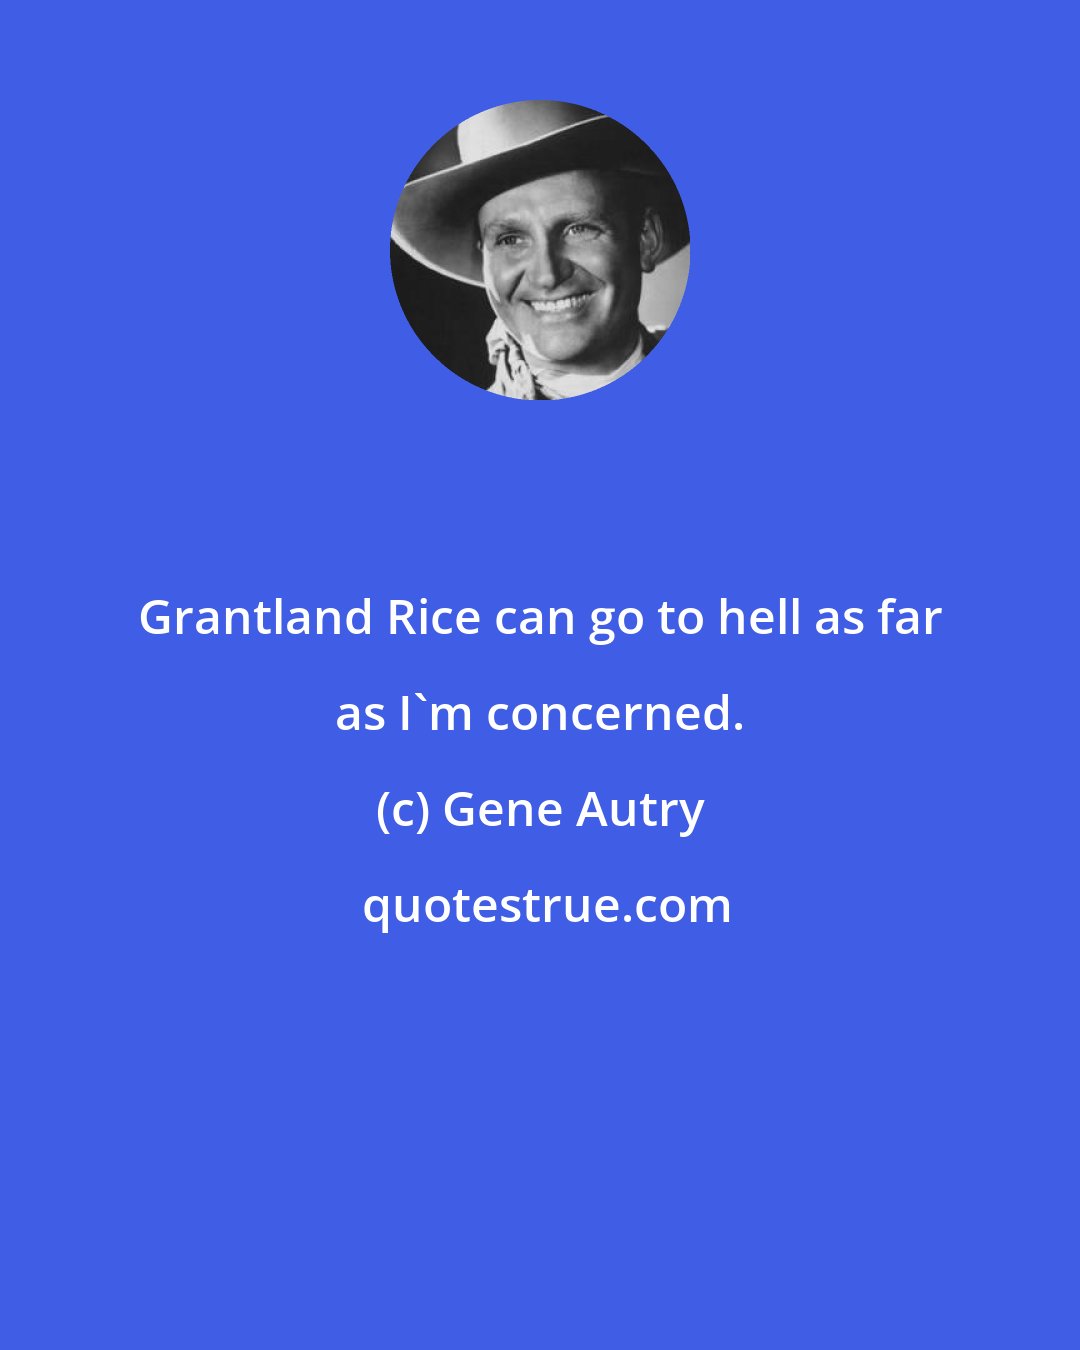 Gene Autry: Grantland Rice can go to hell as far as I'm concerned.